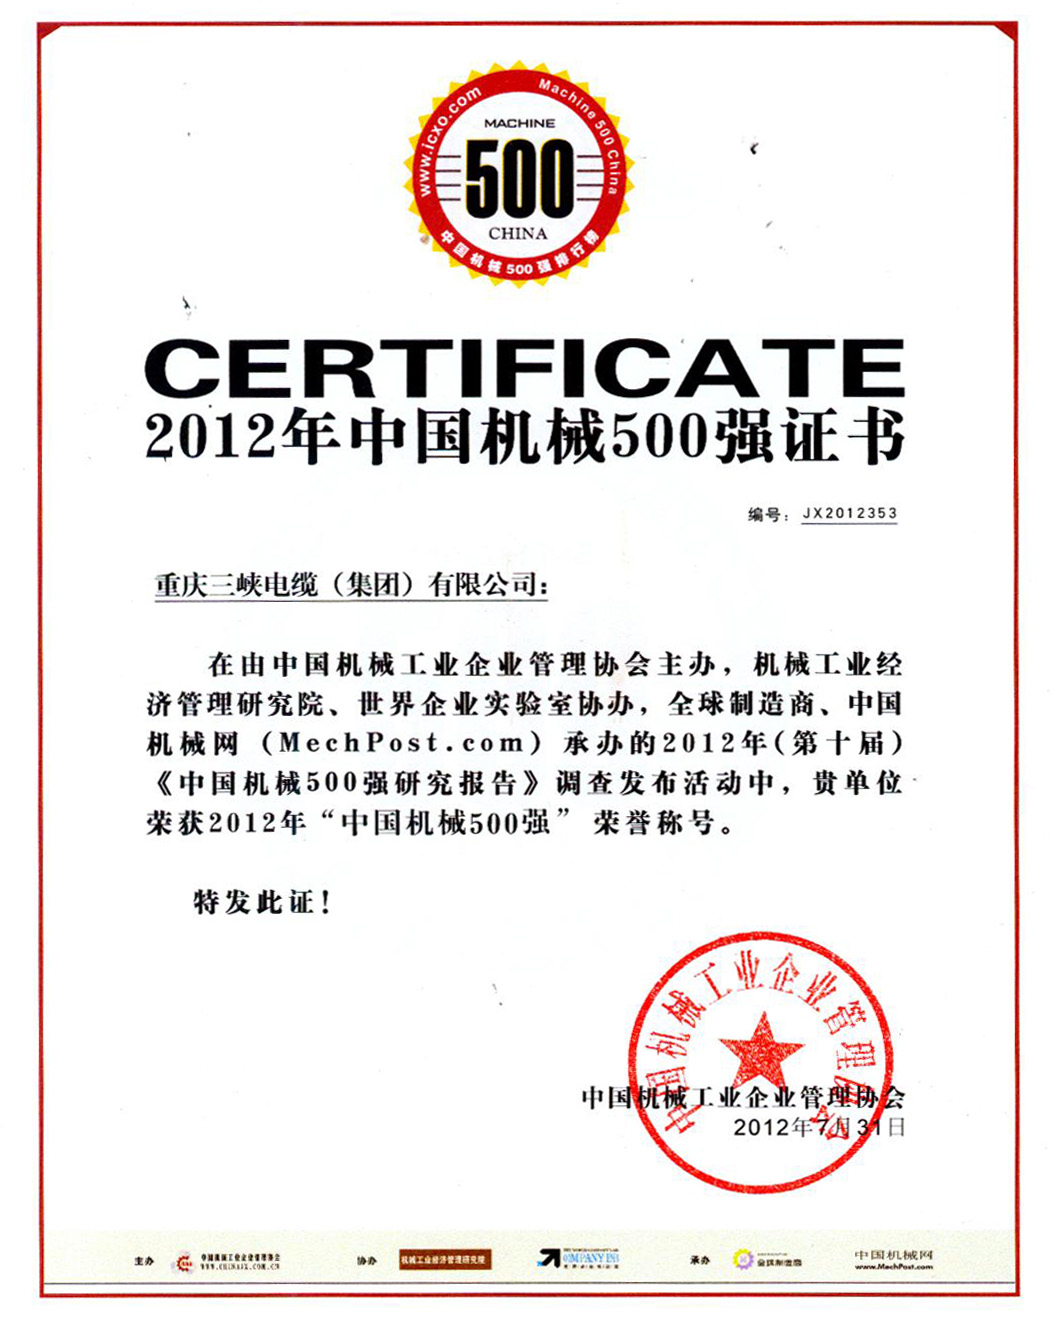 Certificate of China top 500 machinery in 2012